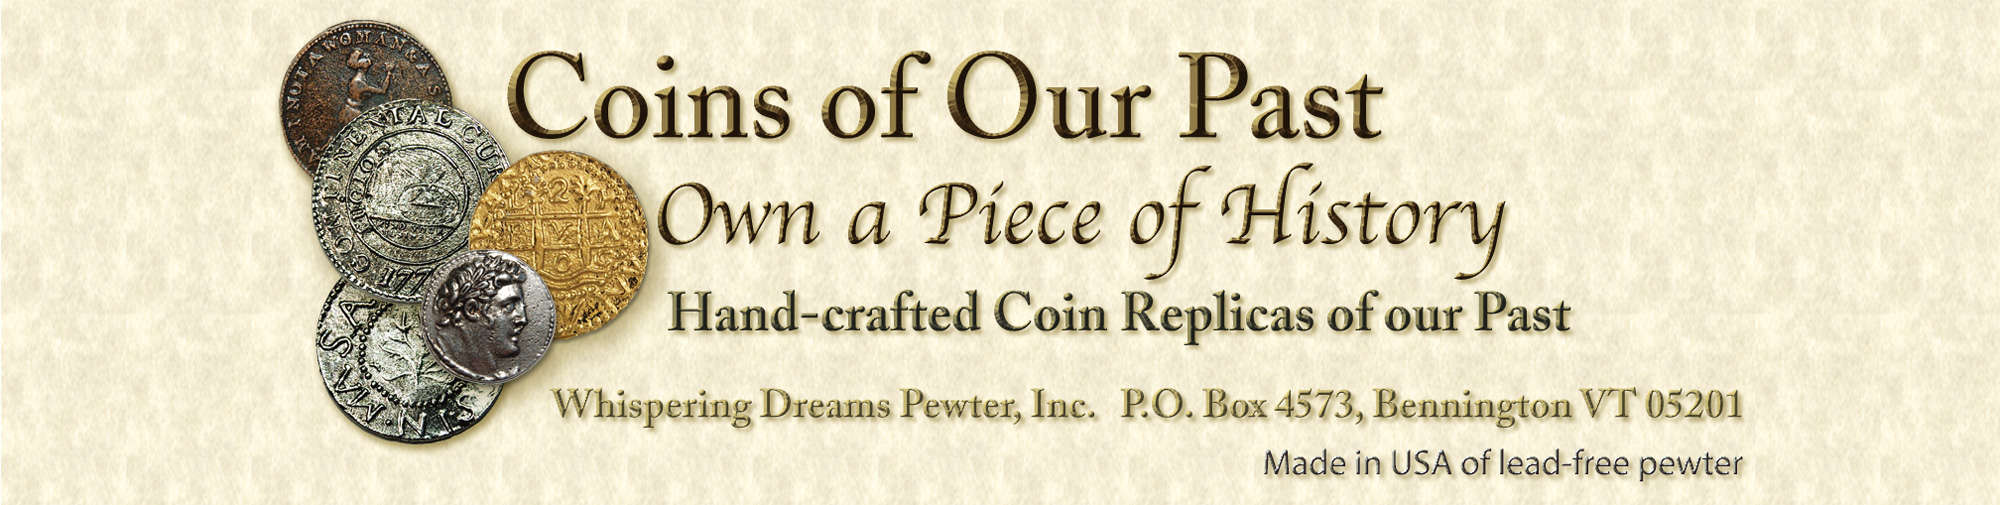 Coins Of Our Past